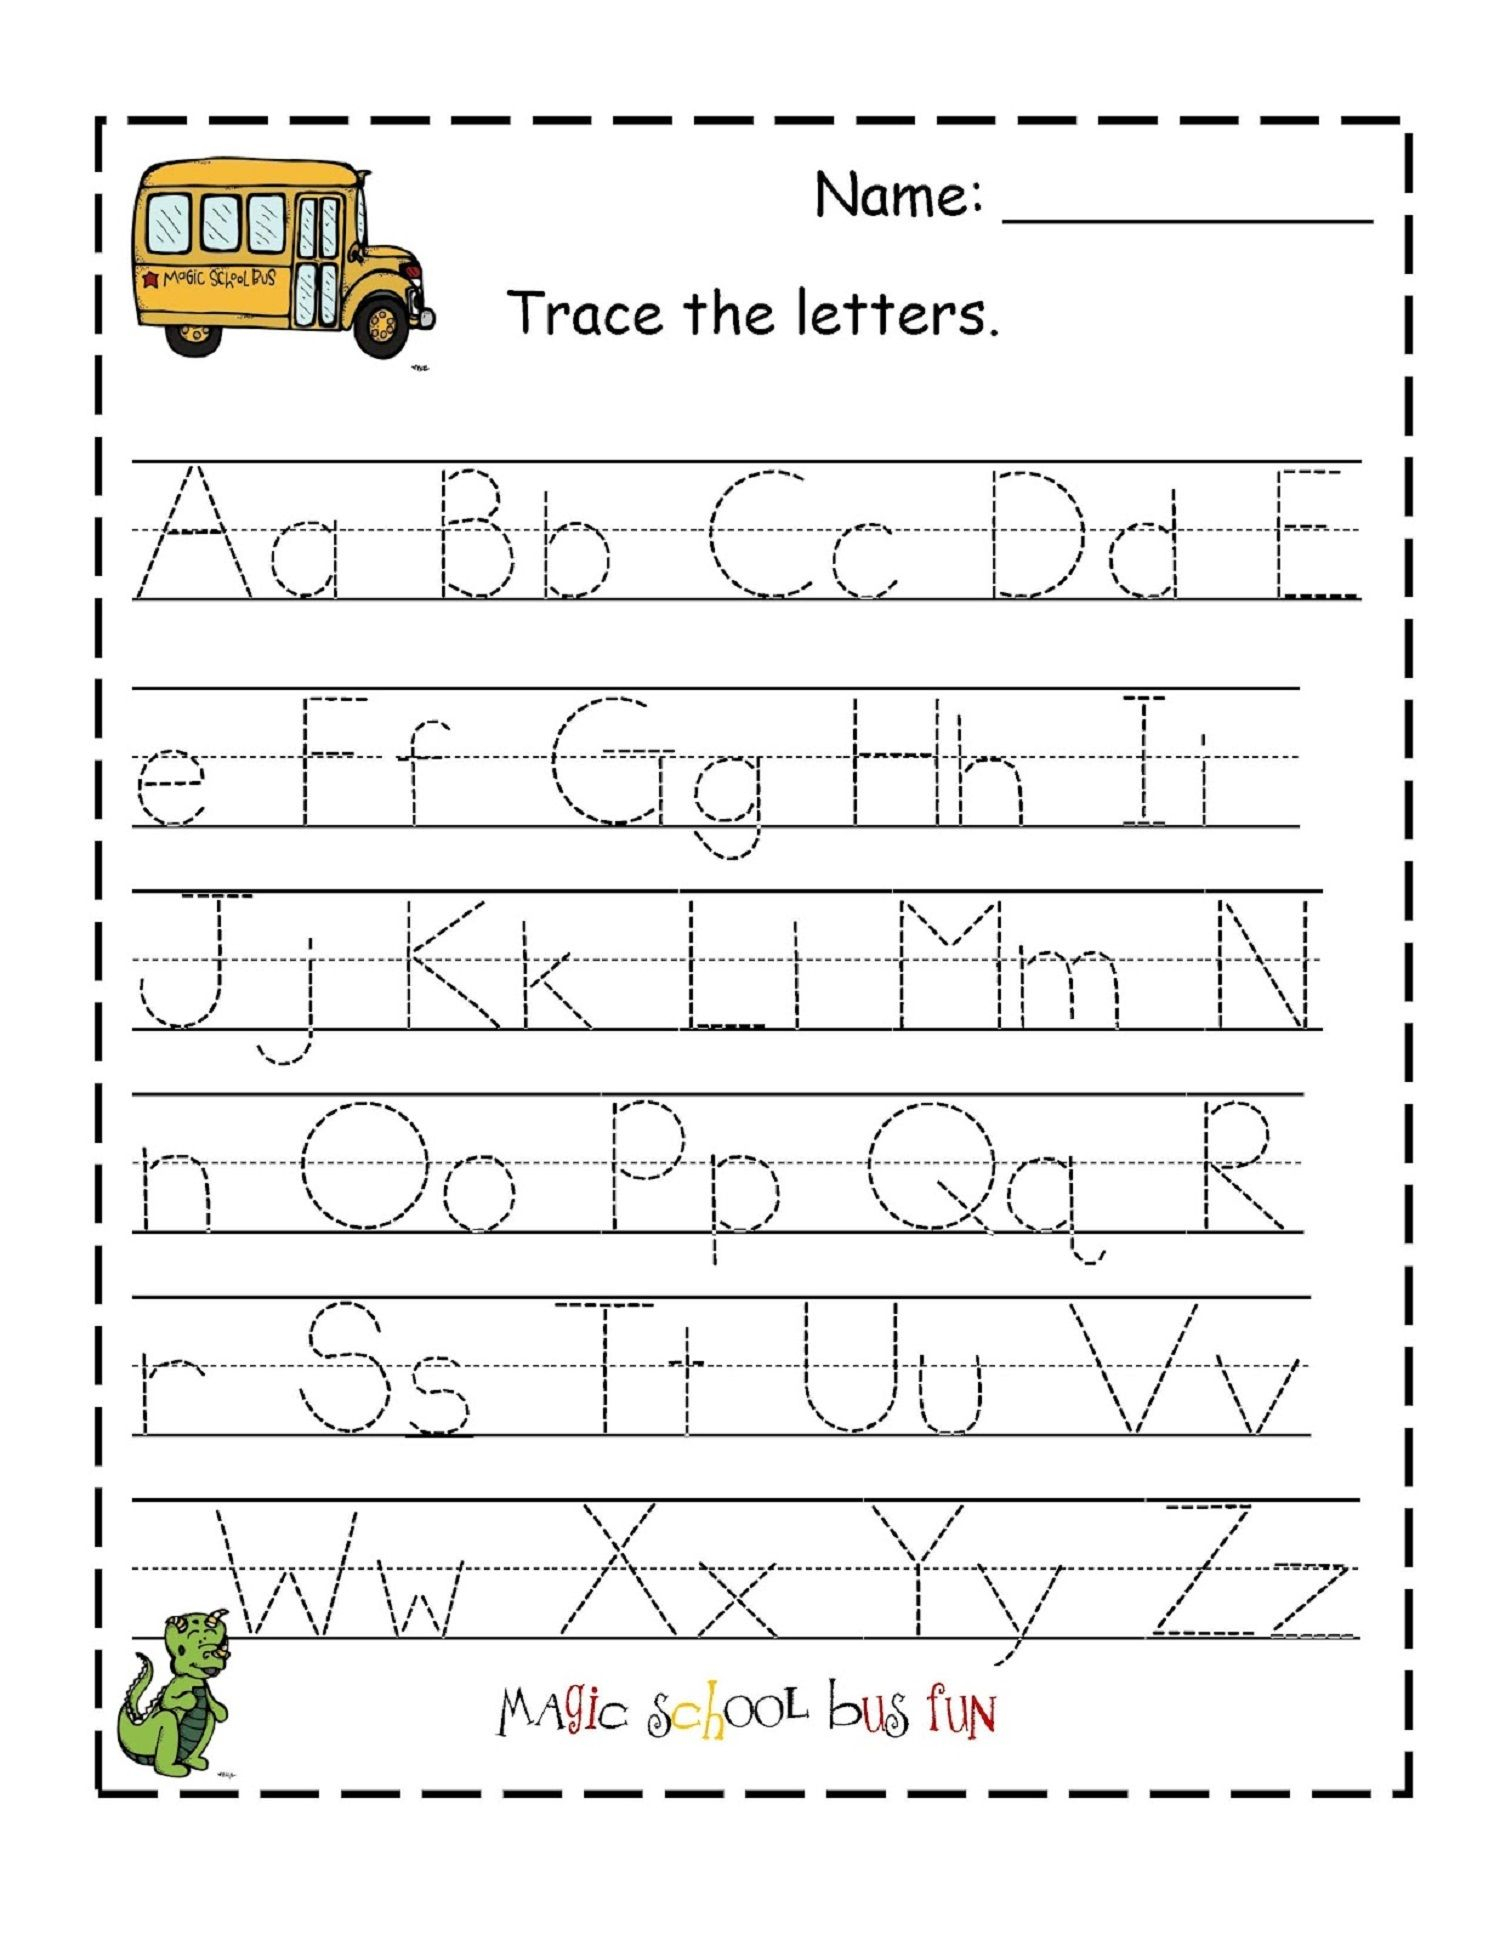 Traceable Alphabet For Learning Exercise | Alphabet Tracing within Alphabet Tracing Sheets Printable